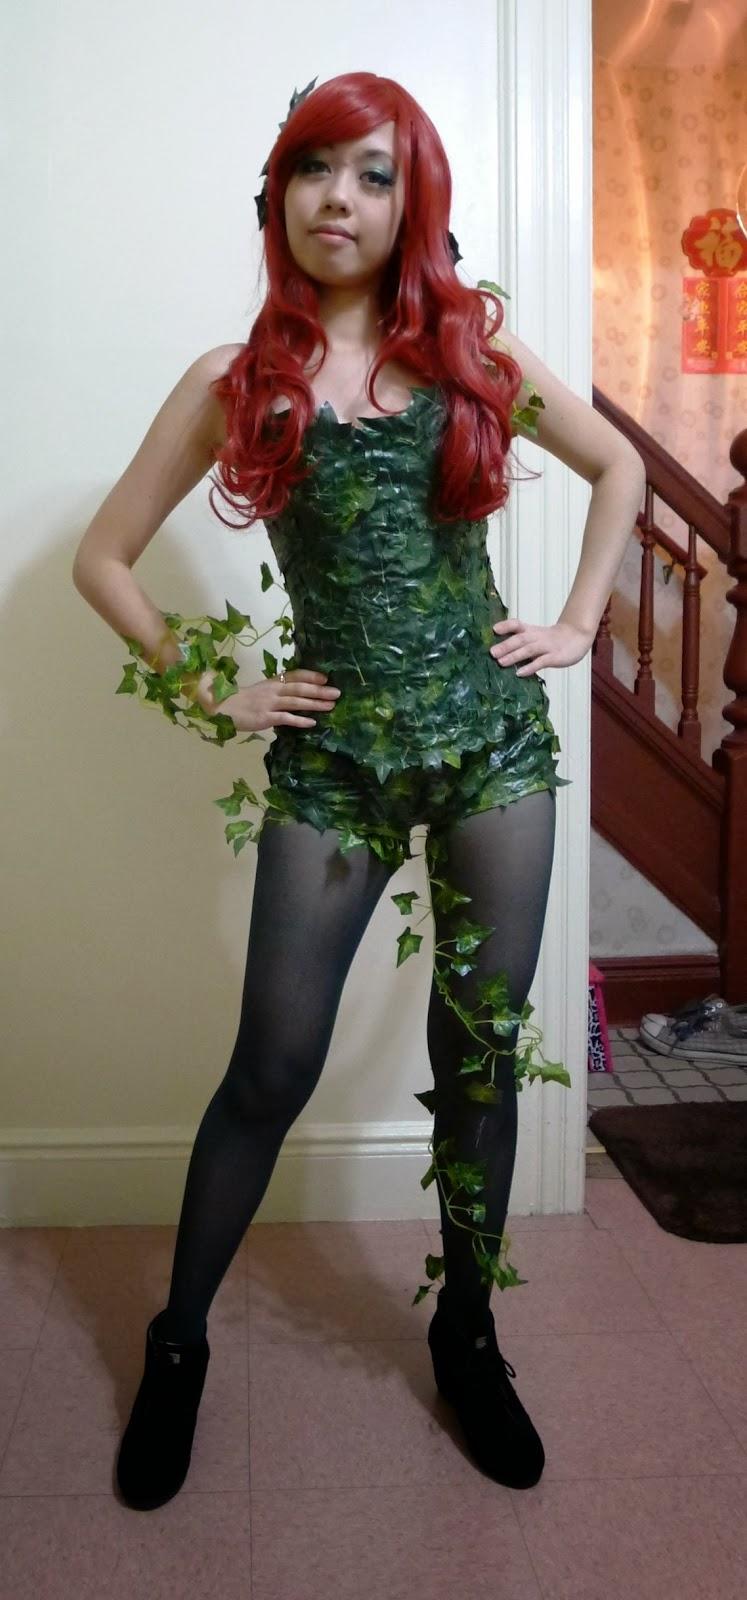 50+ Hot Pictures Of Poison Ivy – One Of The Most Beautiful Batman’s Villain 38